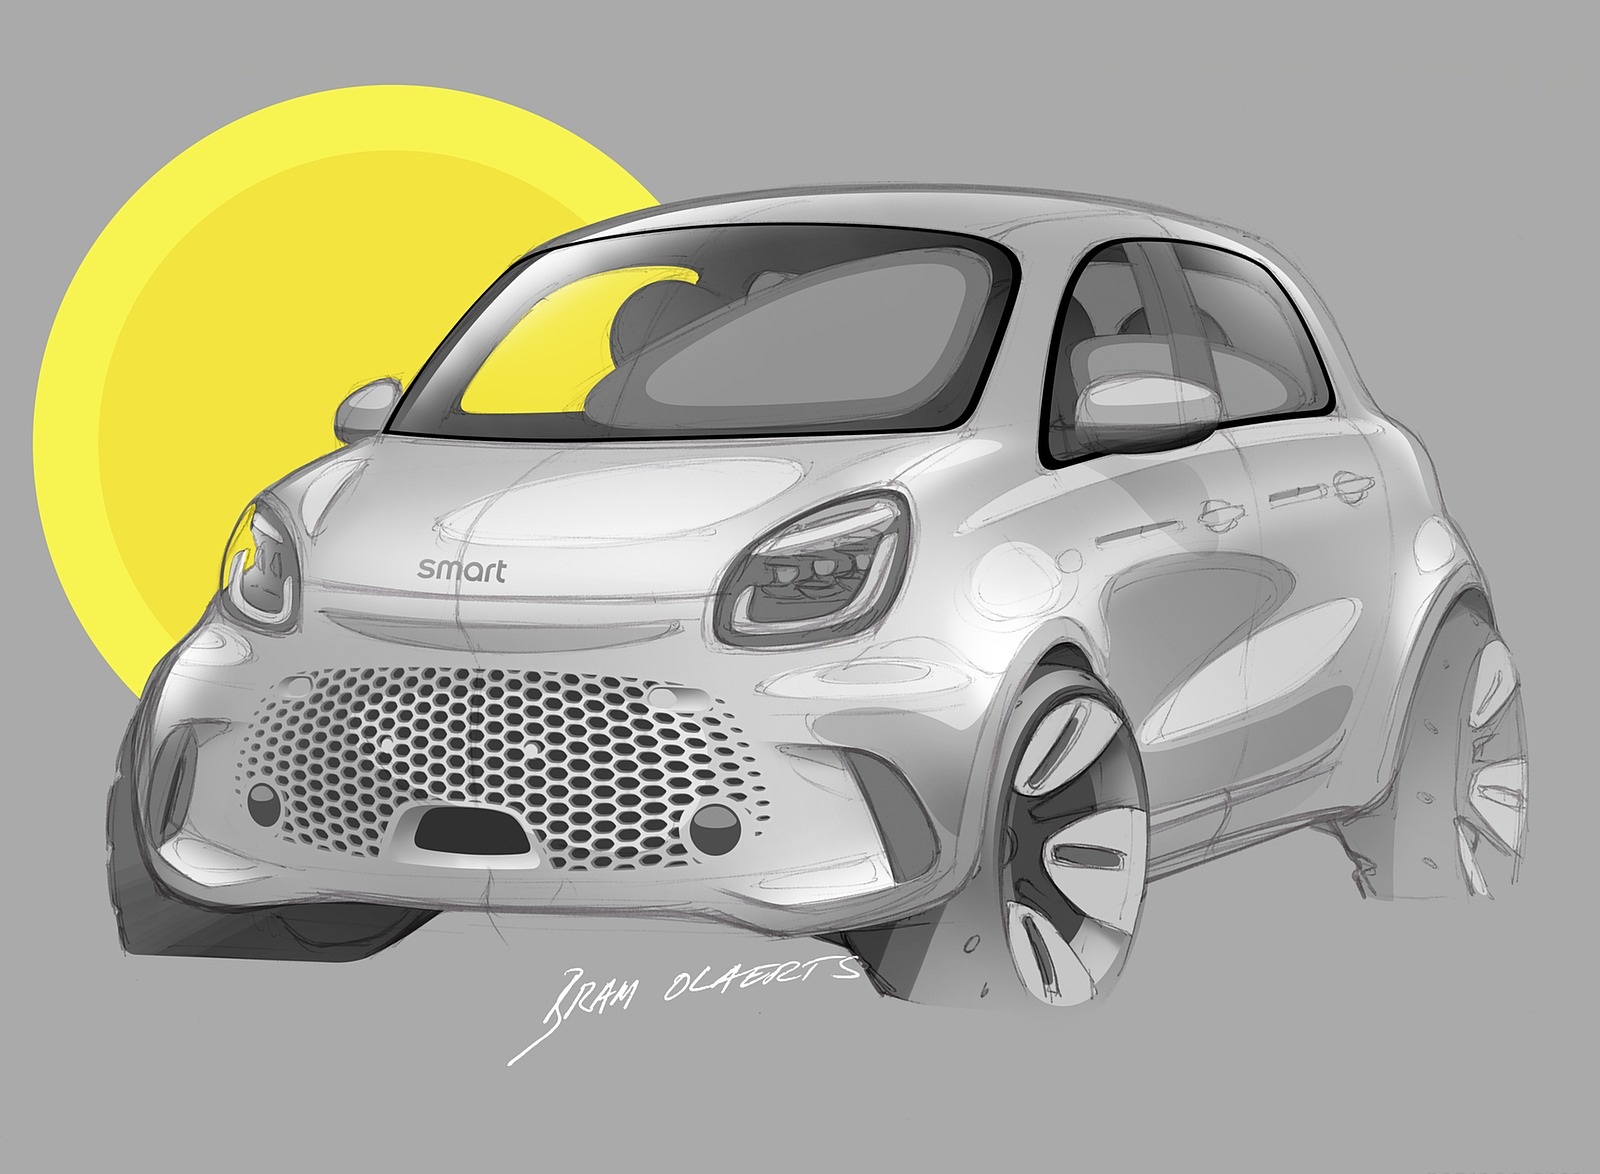 2020 Smart EQ ForTwo Coupe Design Sketch Wallpapers  #91 of 94